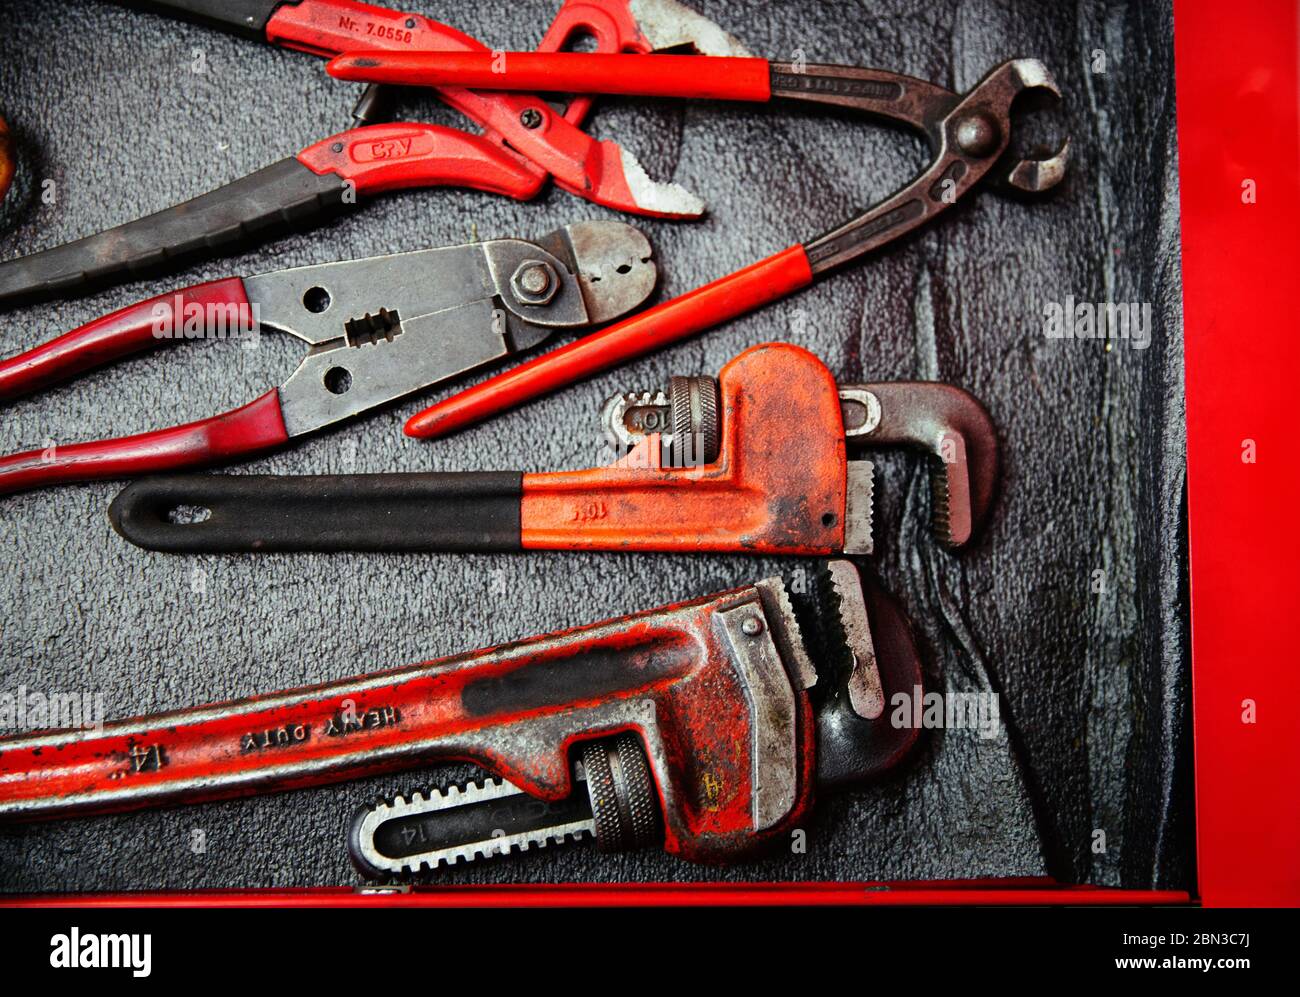 Red wrenches and pliers Stock Photo